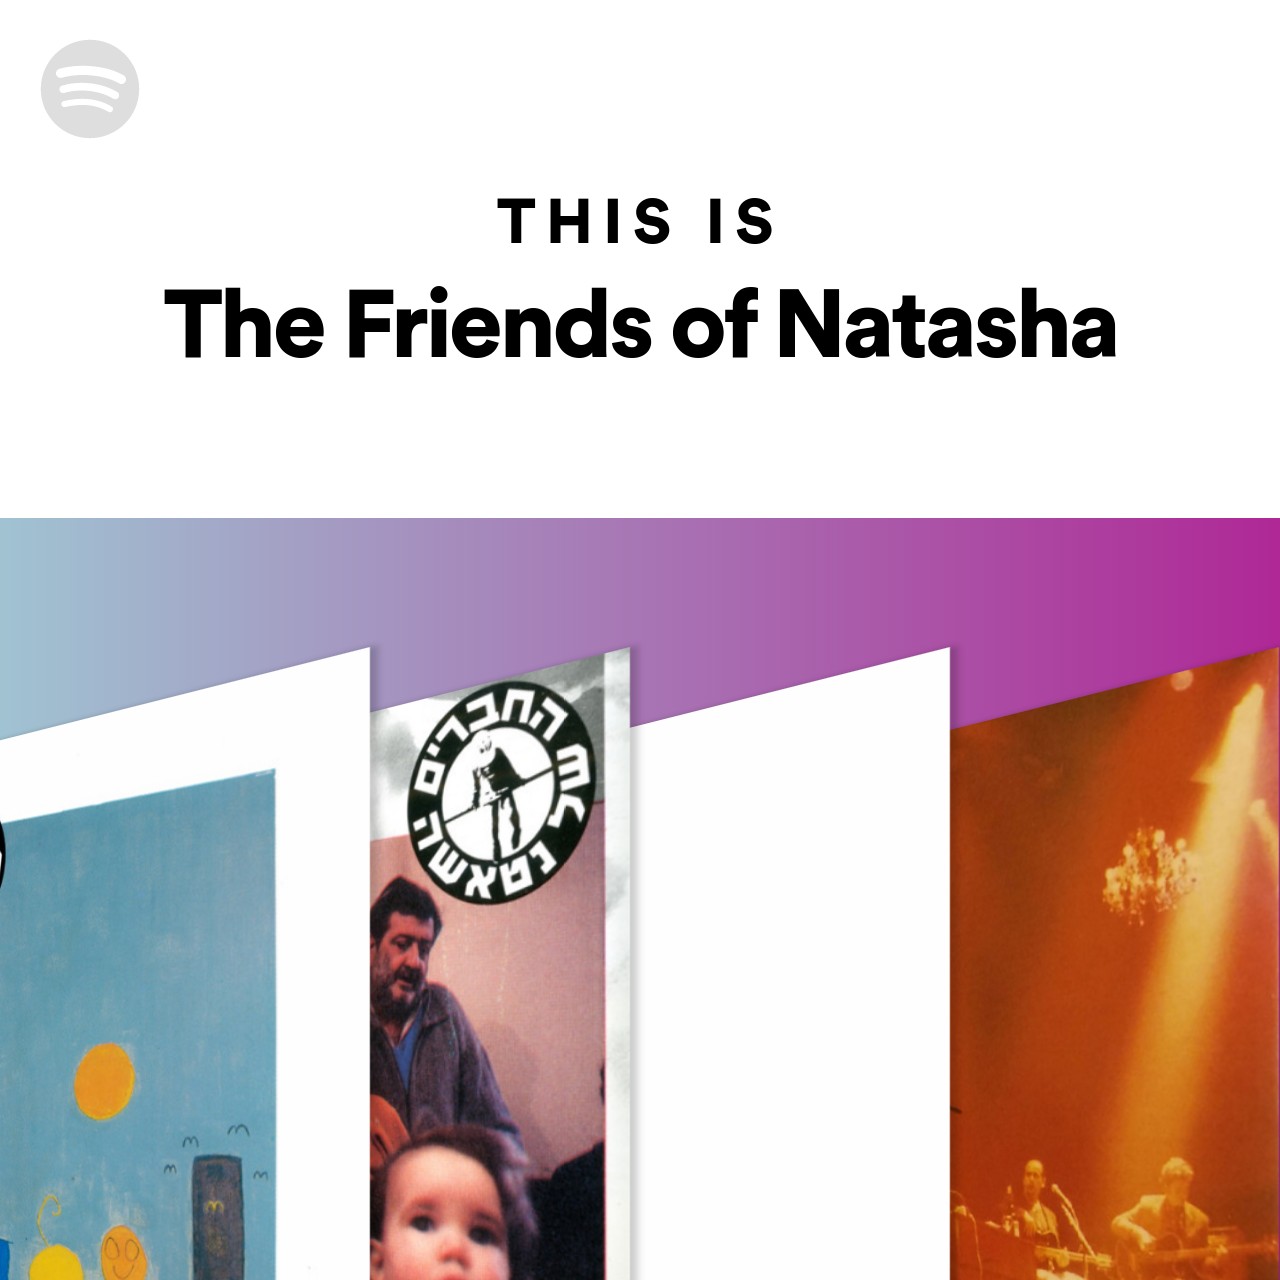 This Is The Friends of Natasha